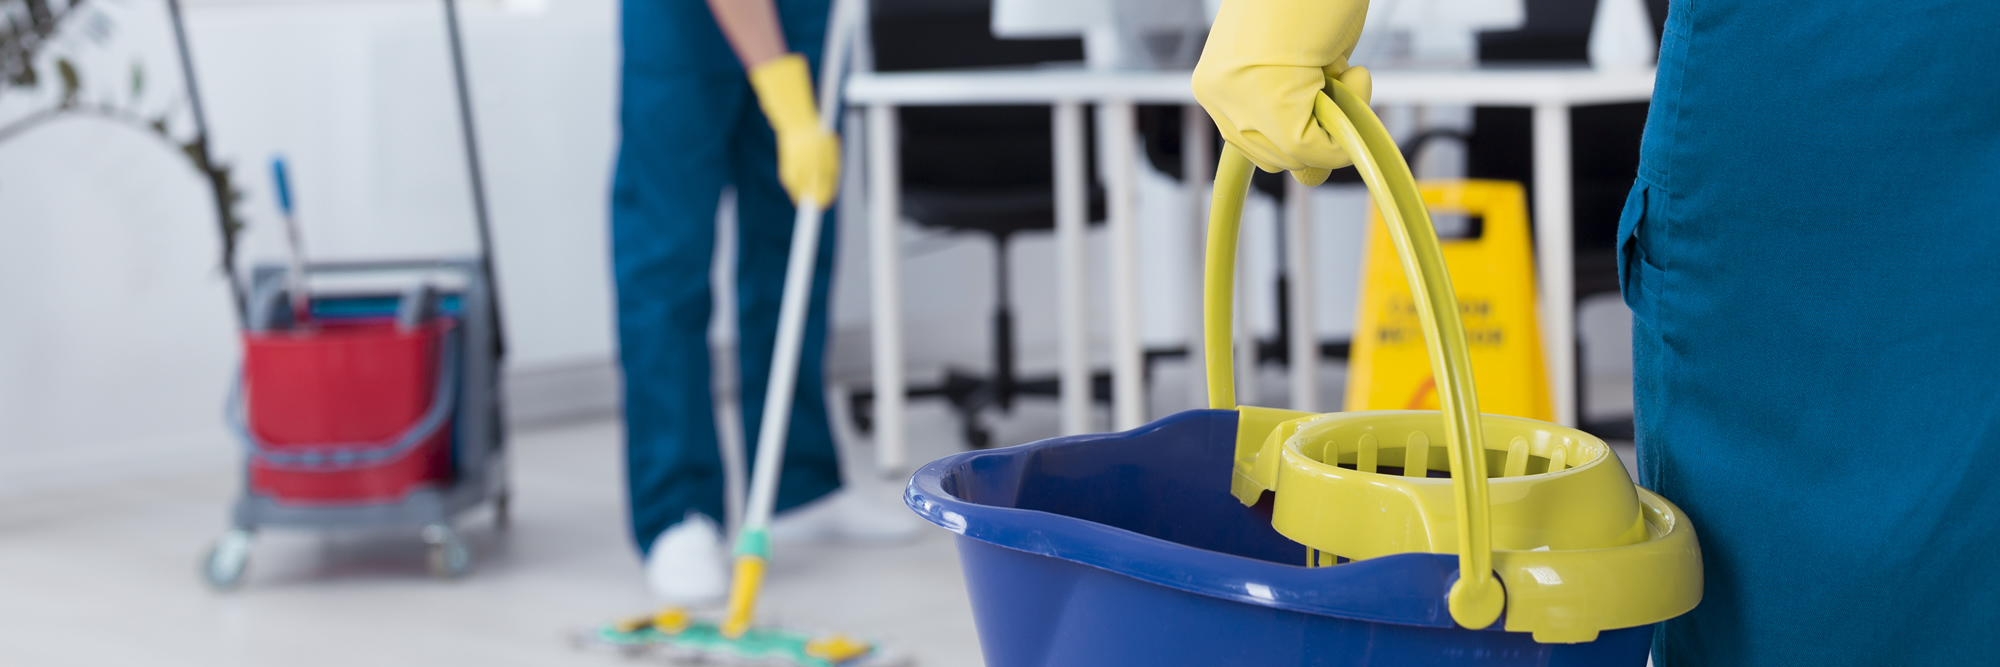 Cleaning services with bucket and mop in office